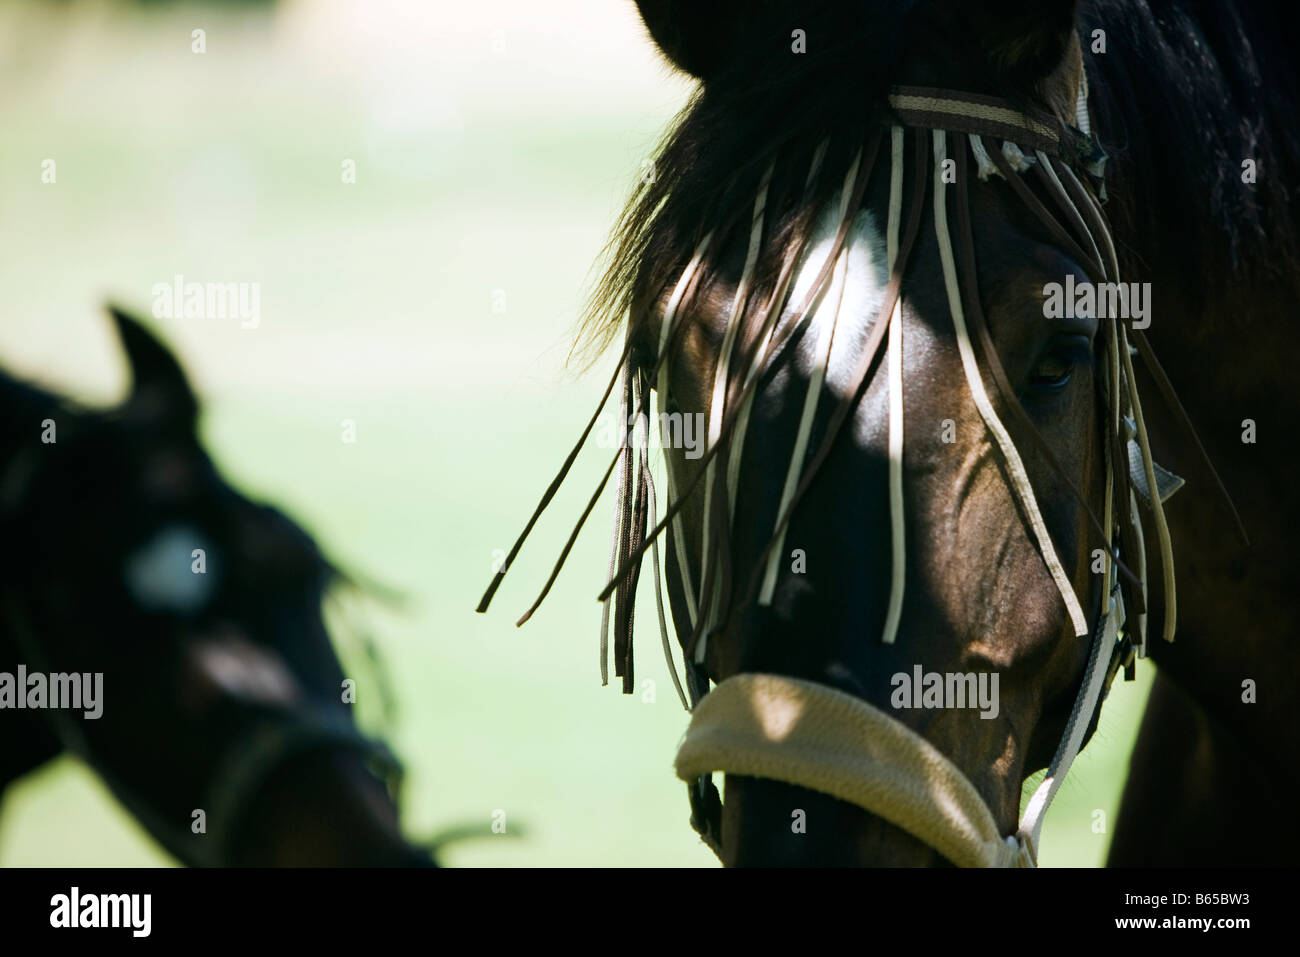 Horse wearing harness, close-up Stock Photo